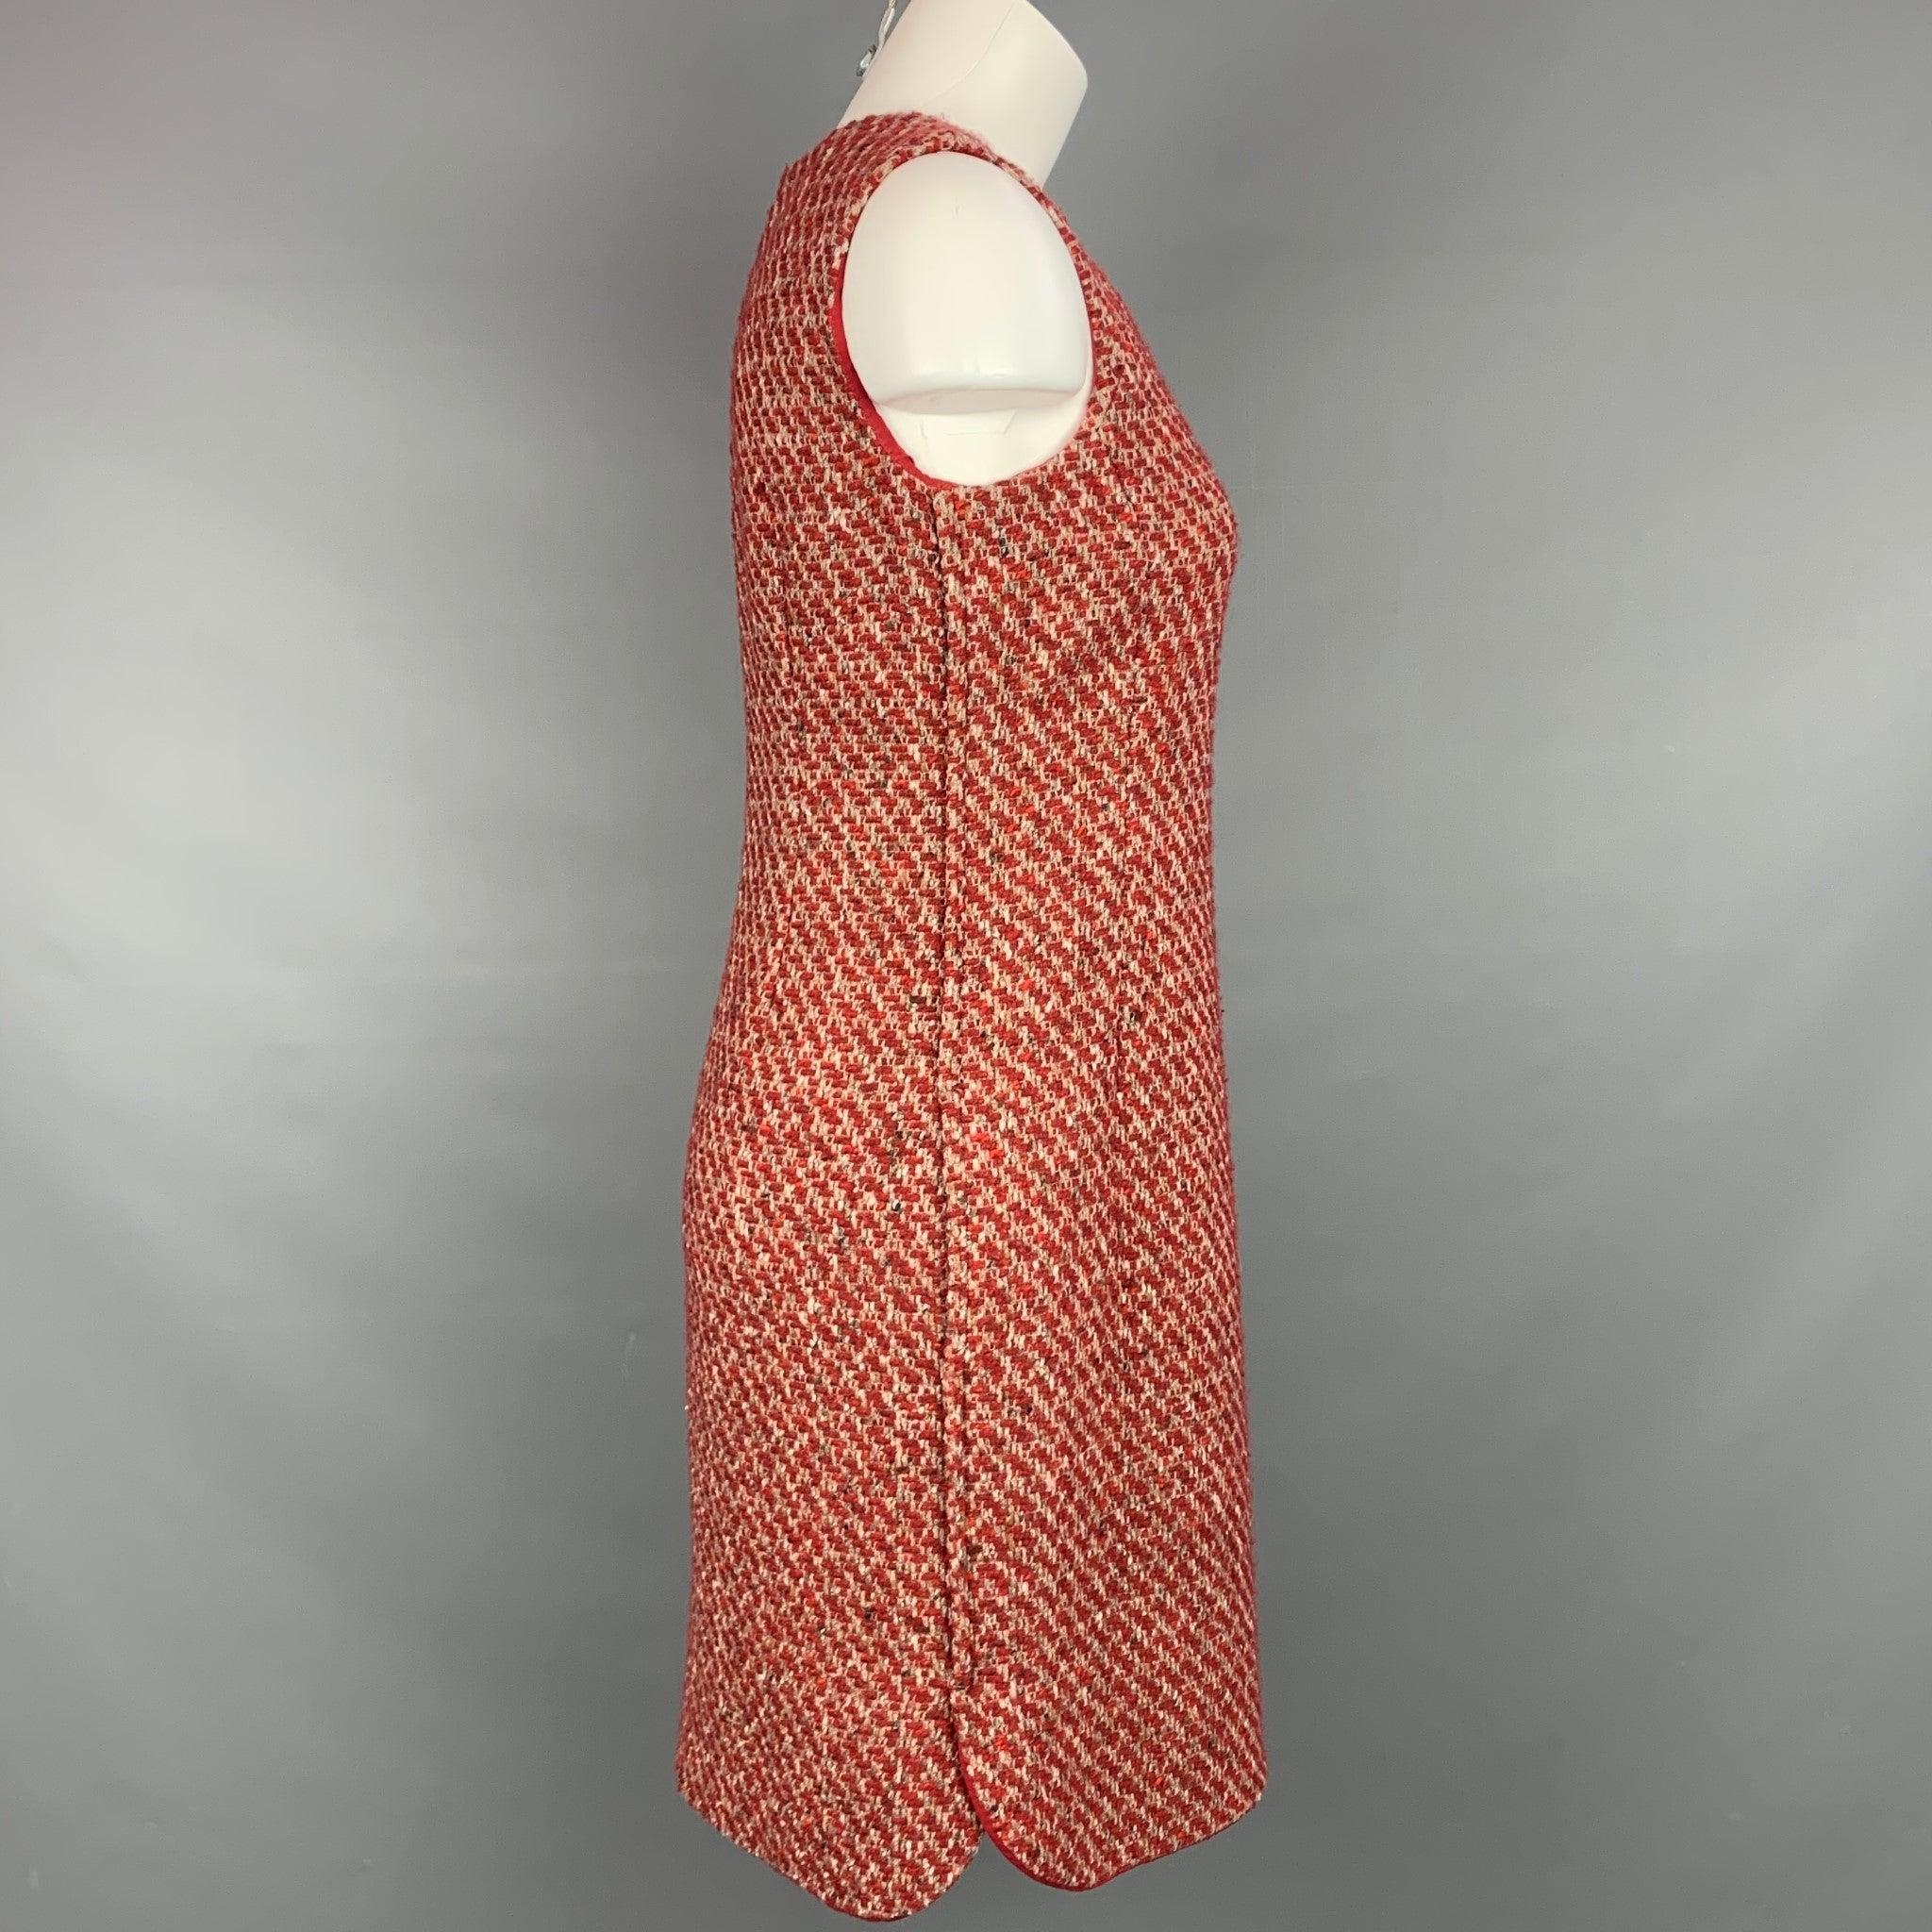 LORO PIANA dress comes in a red & taupe boucle textured cashmere blend with a full liner featuring a shift style, slit pockets, and a back zipper closure. Made in Italy.Very Good
Pre-Owned Condition. 

Marked:   42 

Measurements: 
  Bust: 34 inches